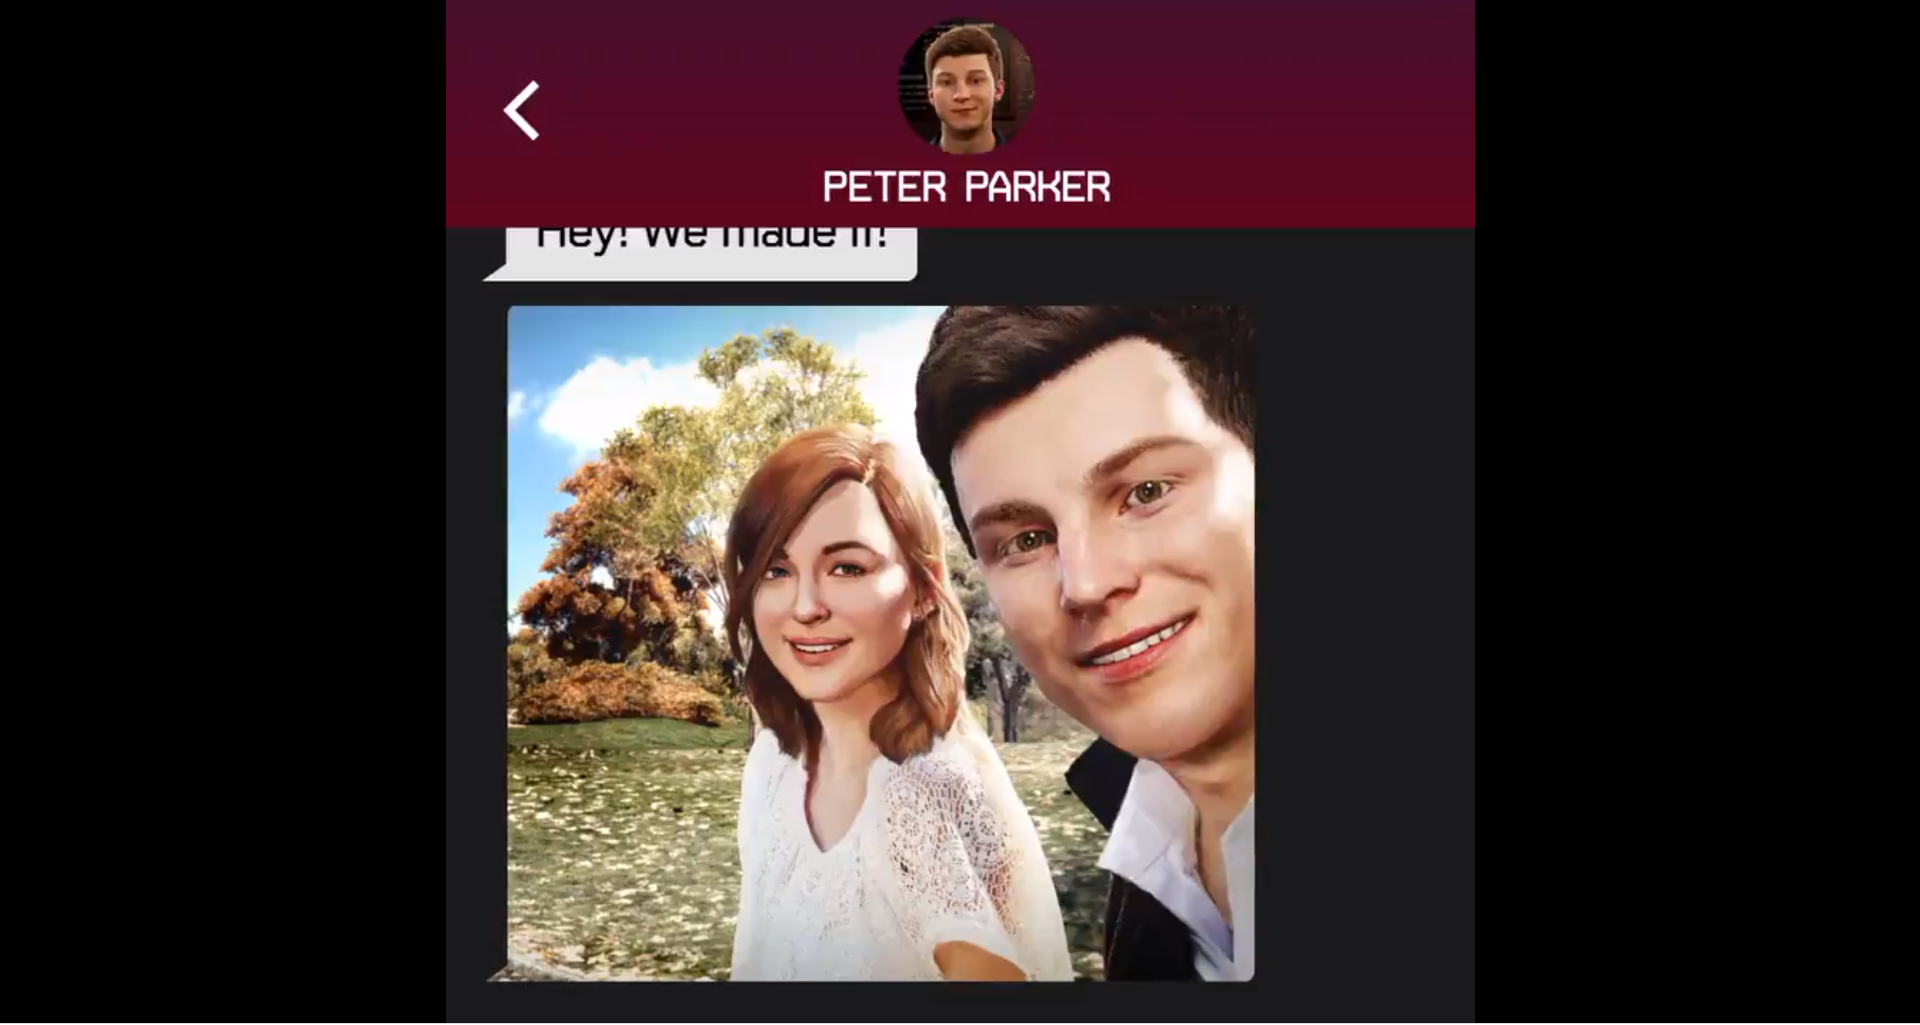 Is Parker a man or a woman?